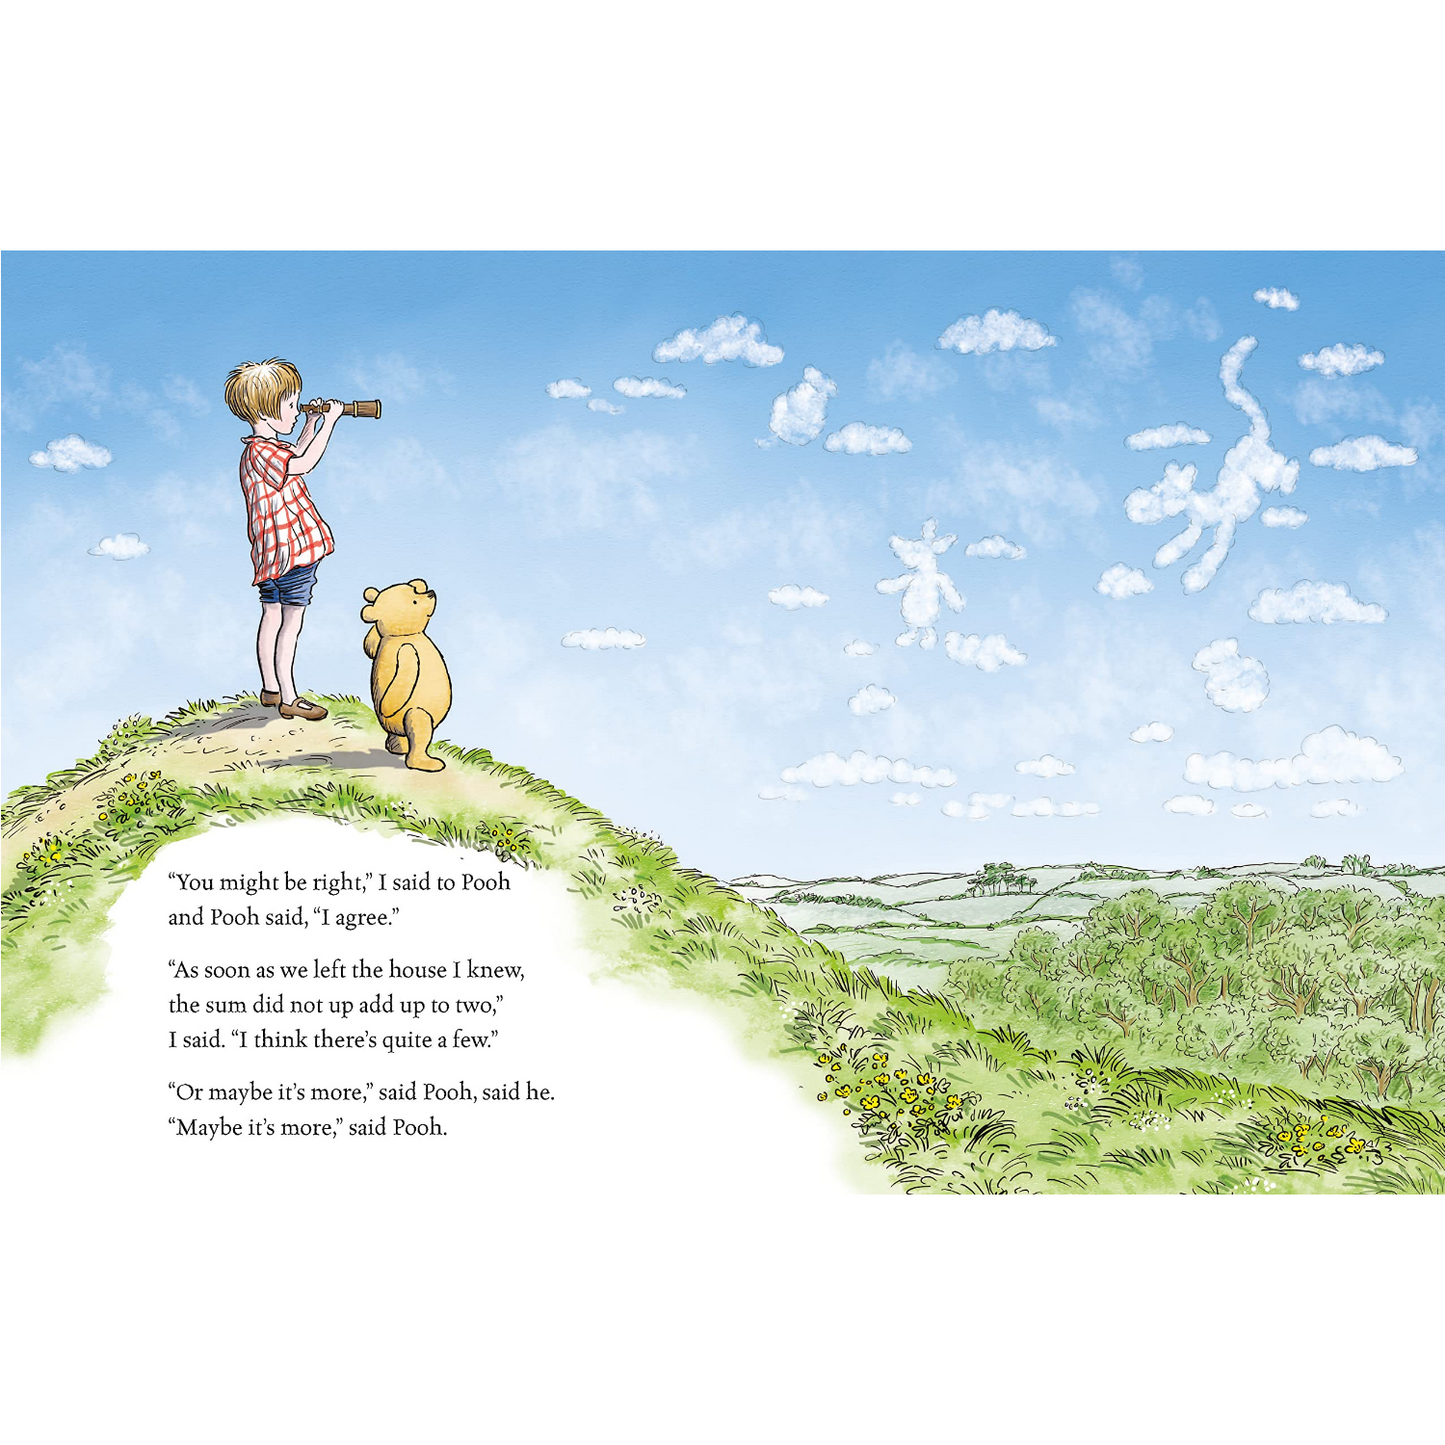 Winnie-the-Pooh and Me | Hardcover | Children’s Book